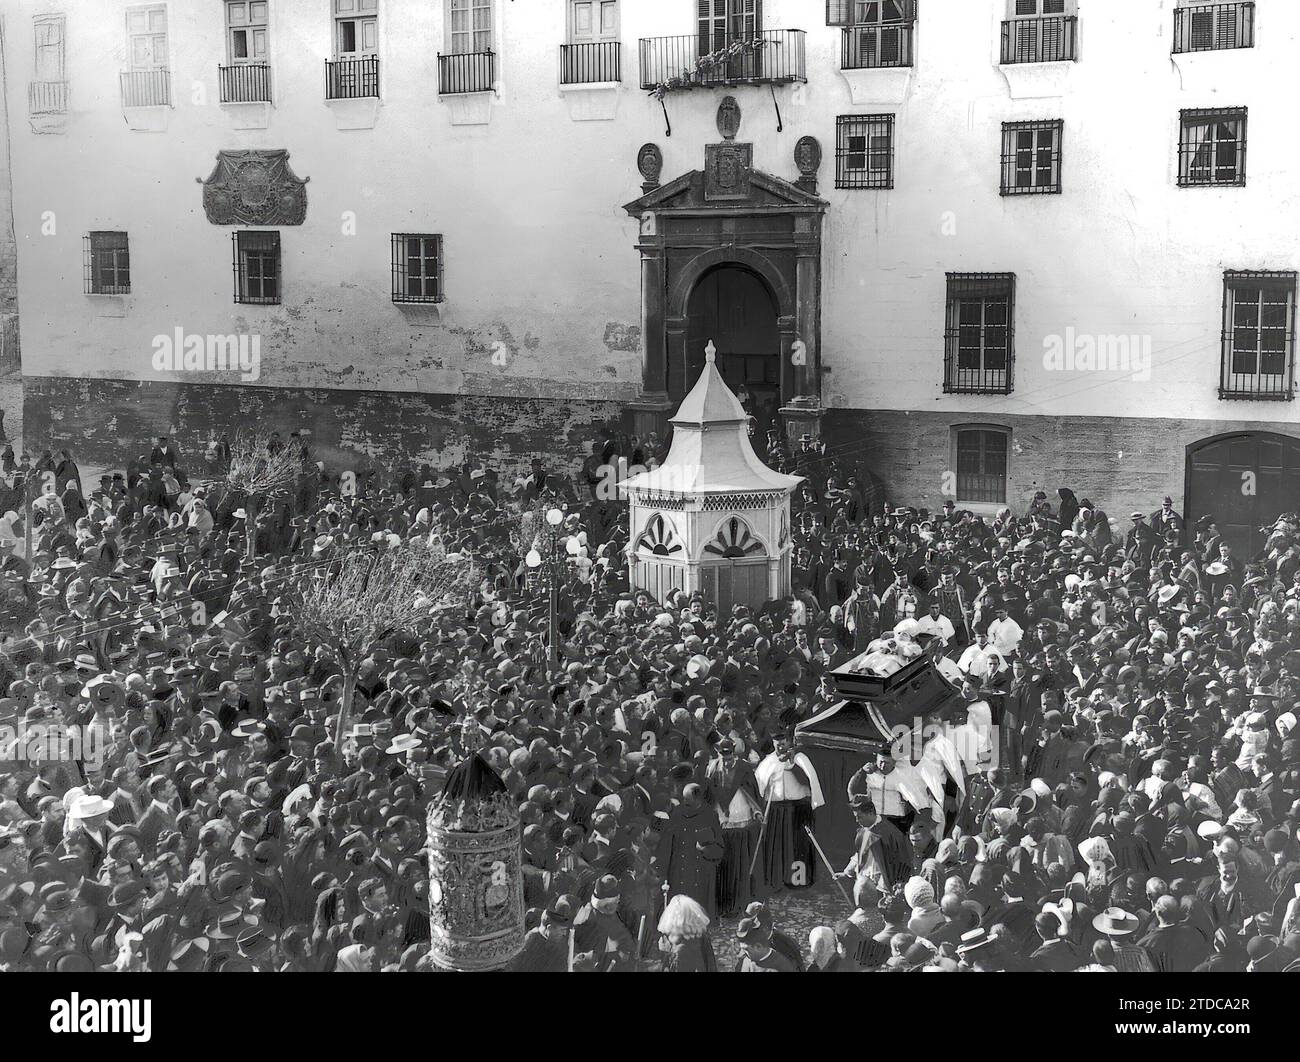 12/28/1906. Jaén - burial of Bishop Mr. Castellote, Alp asar in the Plaza de Santa María in the background the Episcopal Palace. Credit: Album / Archivo ABC Stock Photo